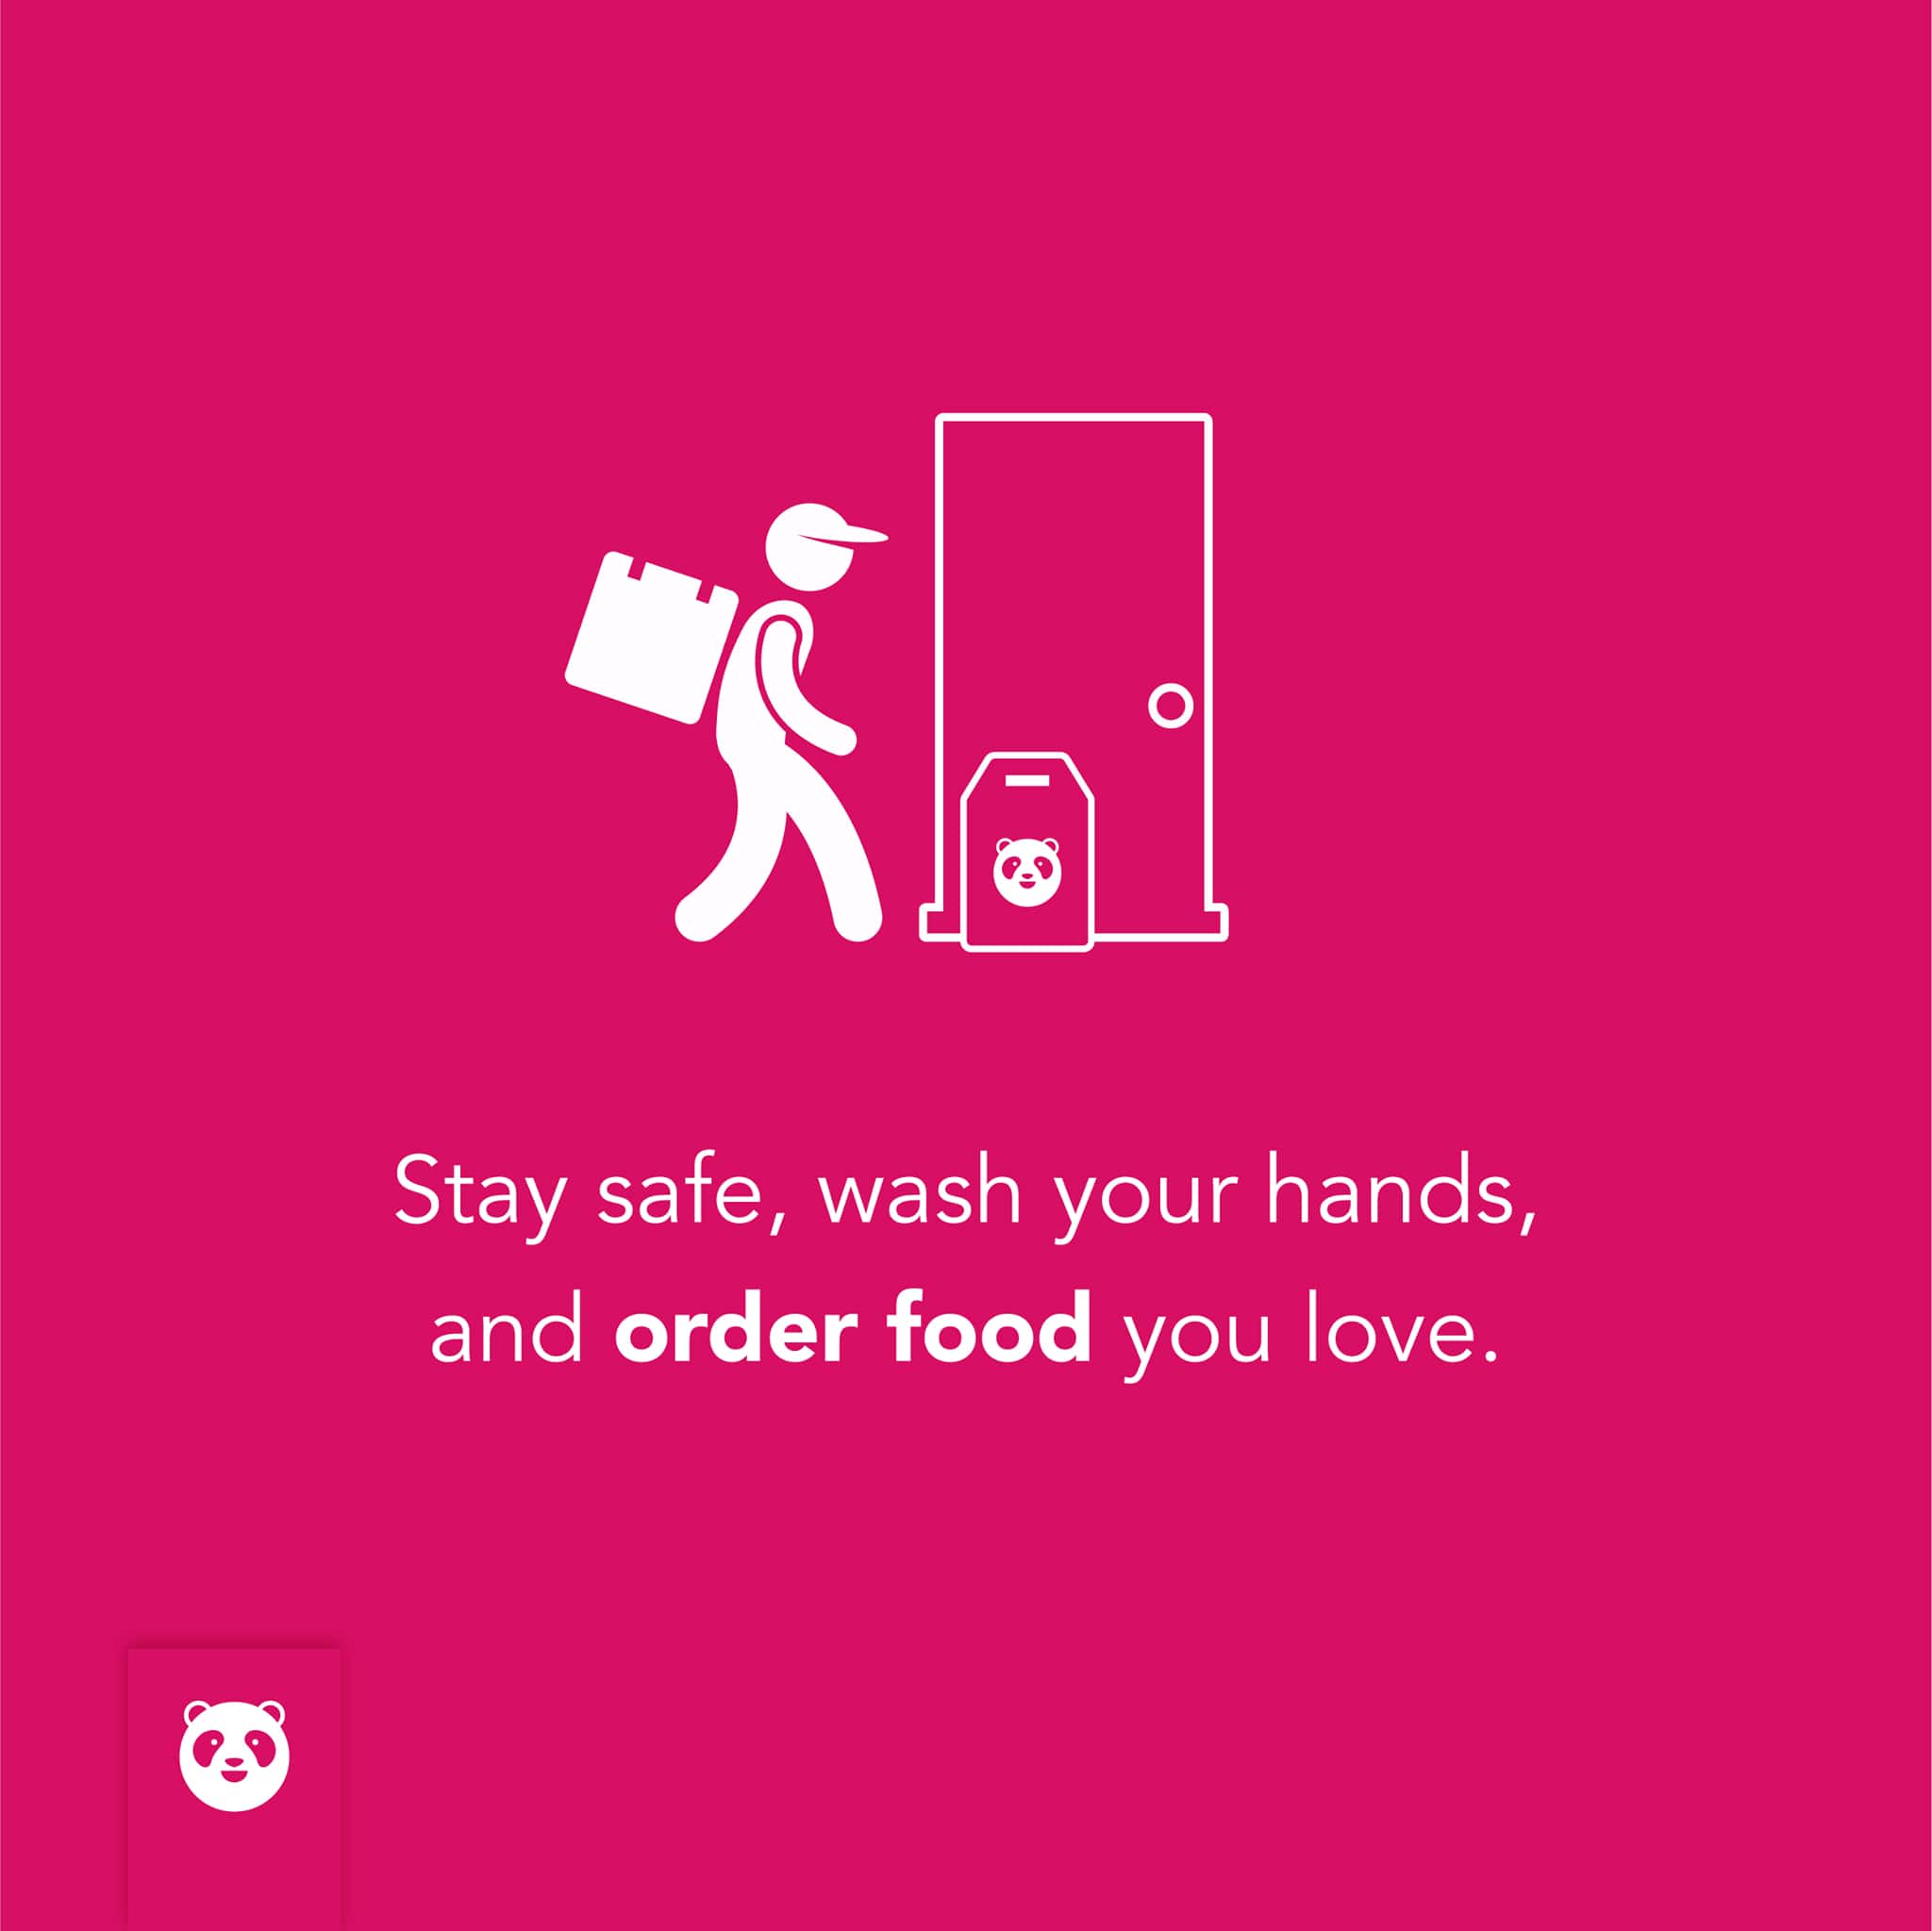 foodpanda contactless delivery